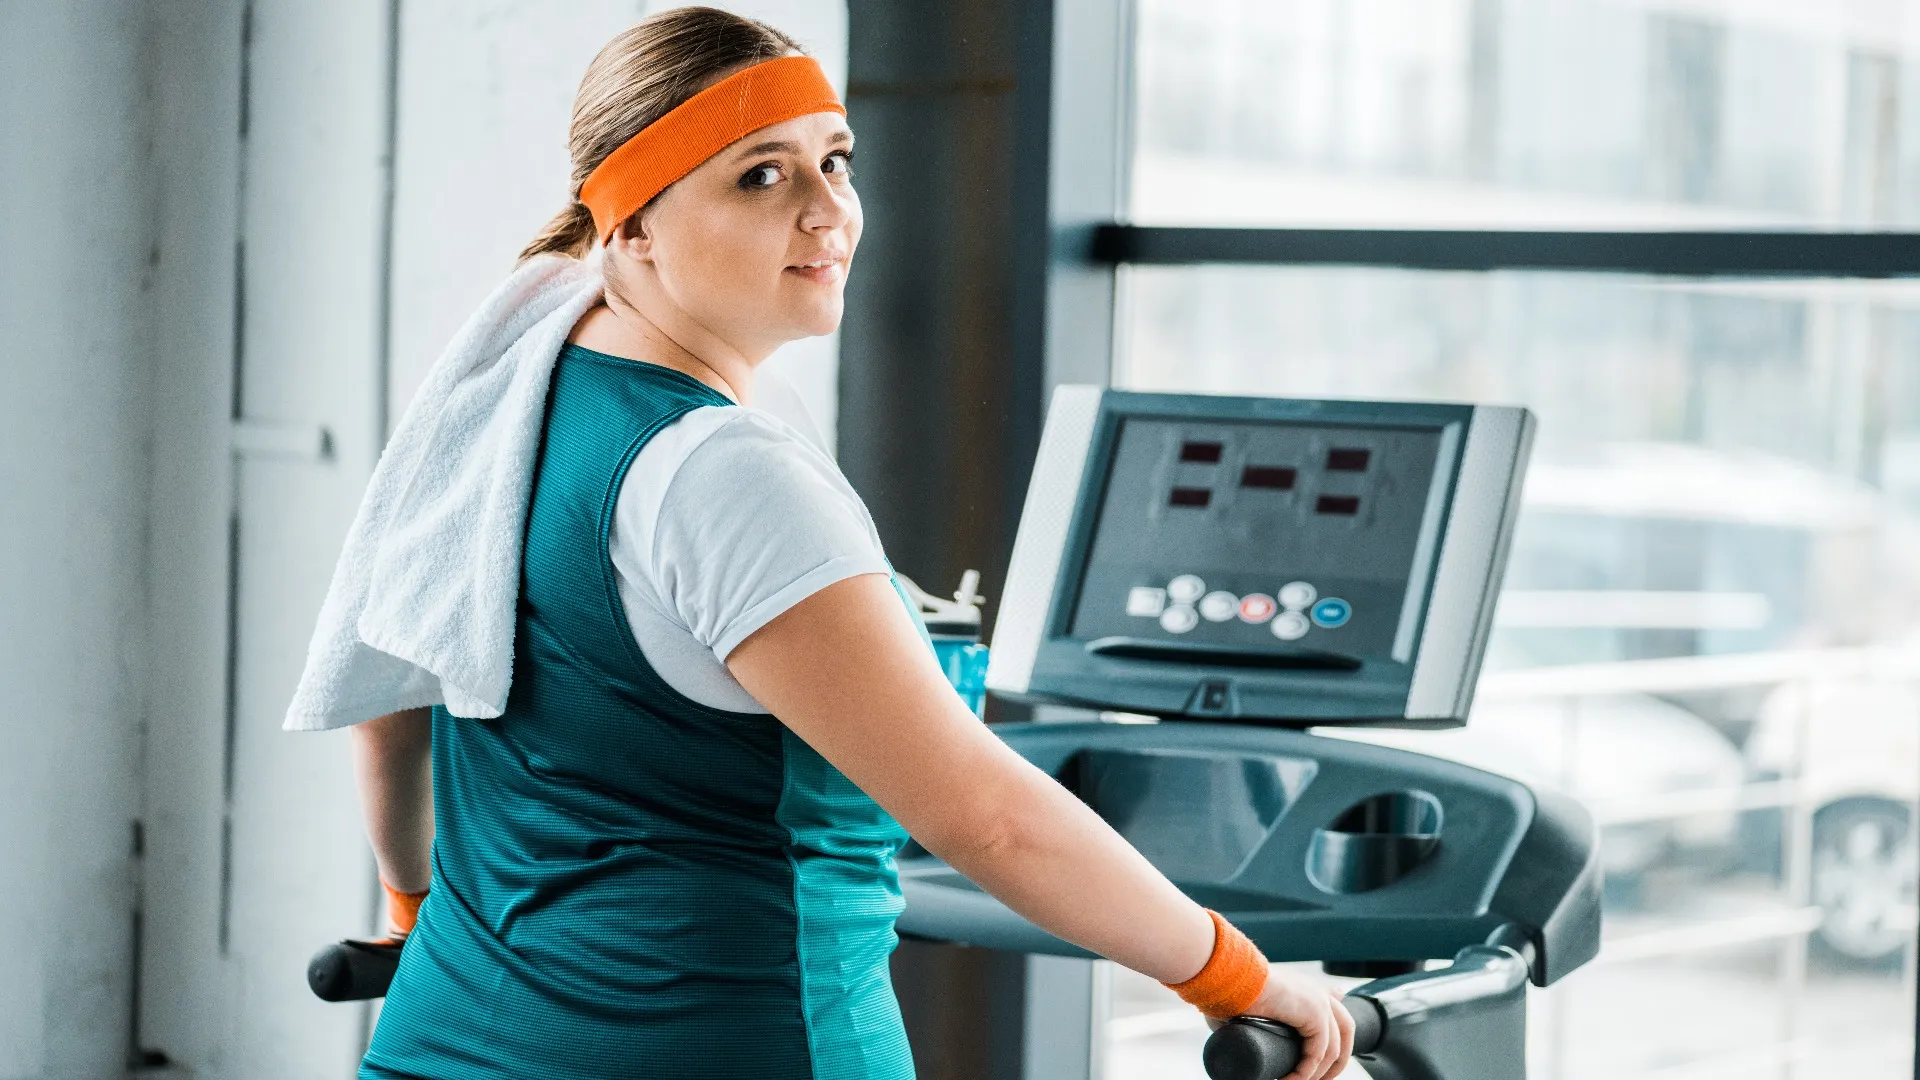 Why Exercising Doesn’t Mean Weight Loss – And What’s Really Keeping You from Dropping the Extra pounds